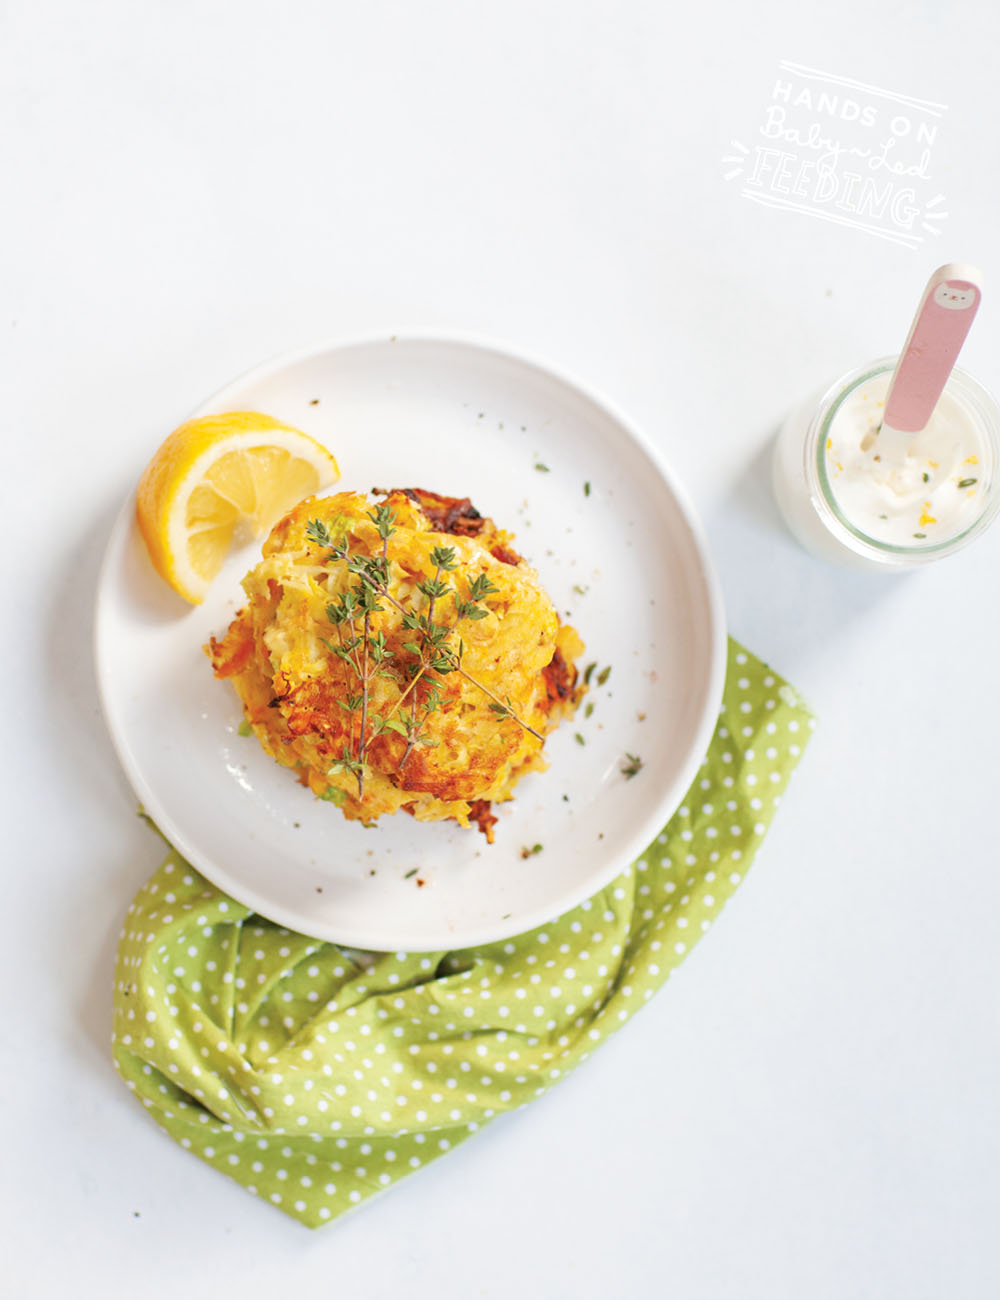 Freezer friendly healthy hash browns loaded with veggies! Easy healthy finger food appetizer or side dish for baby-led weaning. #hashbrown #fingerfood #hiddenveggies #pickyeaters #freezerfriendly #babyledweaning #babyledfeeding #cabbagerecipe #carrots #potatoes